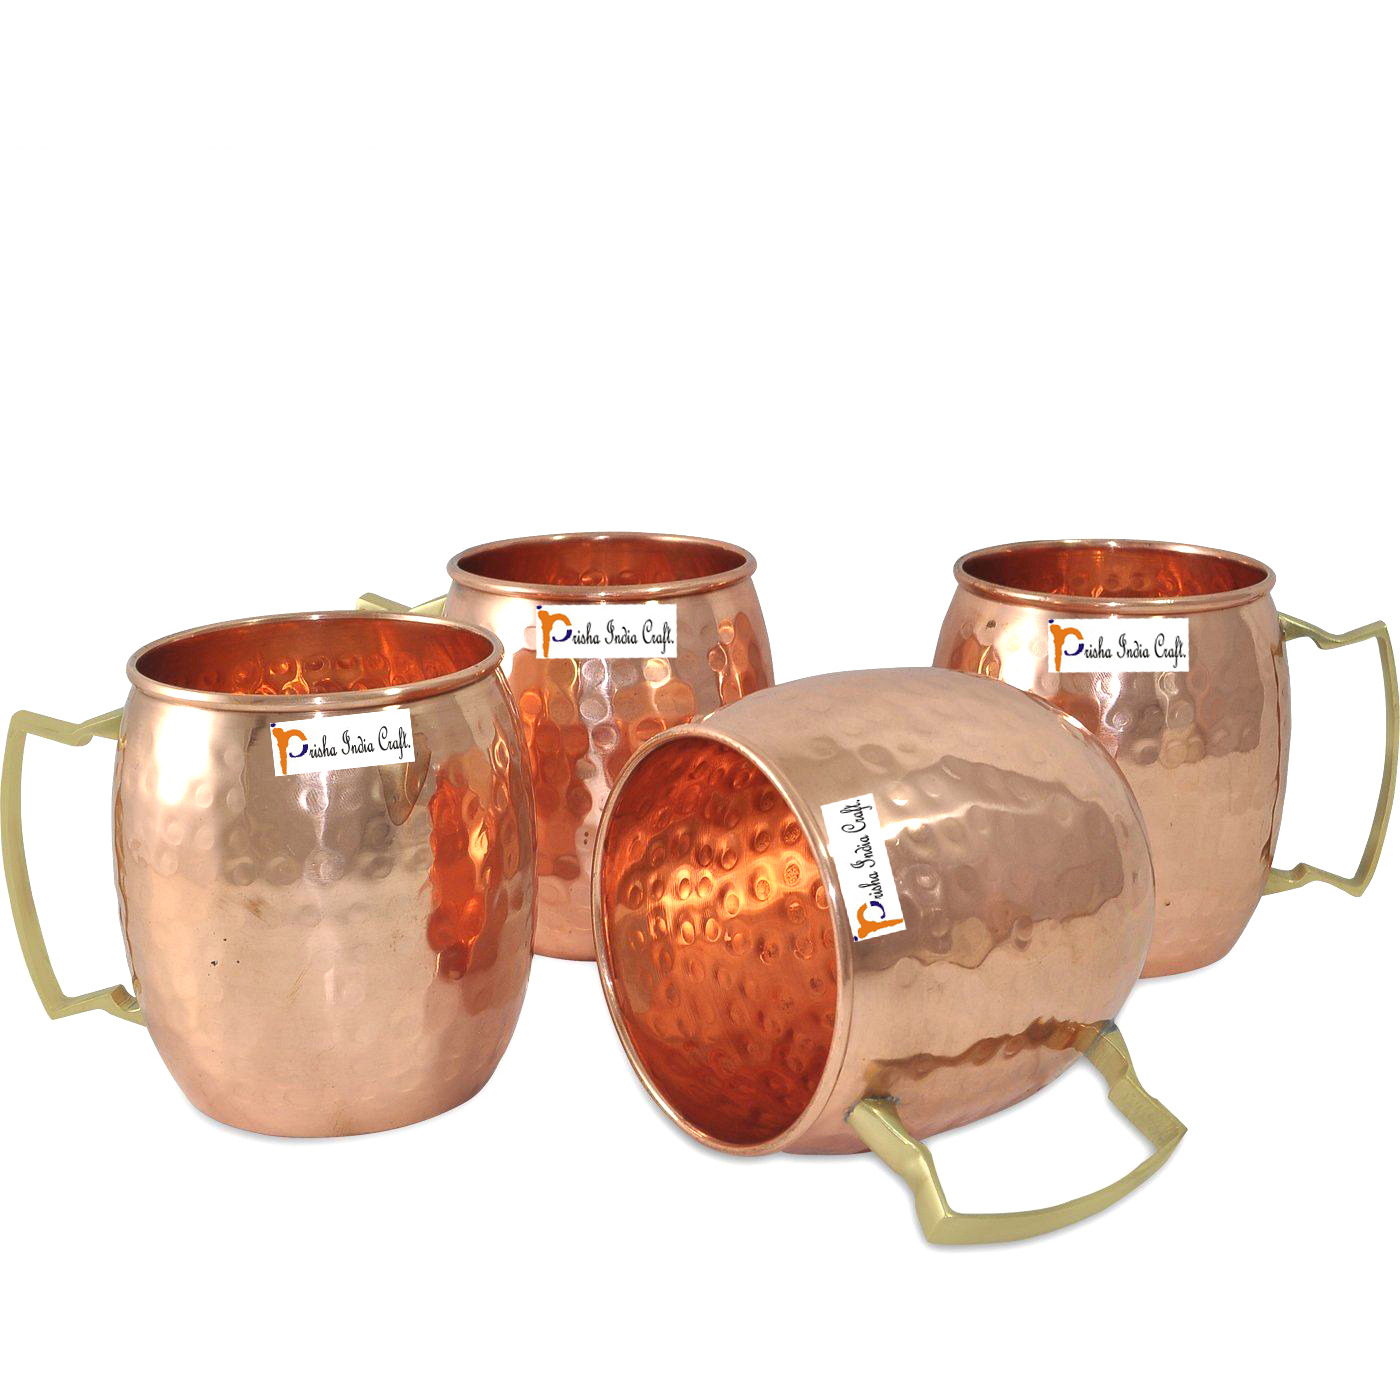 Set of 4 - Prisha India Craft B. Moscow Mule Solid Copper Mug 550 ML / 18 oz - 100% Pure Copper Hammered Best Quality Lacquered Finish, Cocktail Cup, Copper Mugs, Cocktail Mugs with No Inner Linings